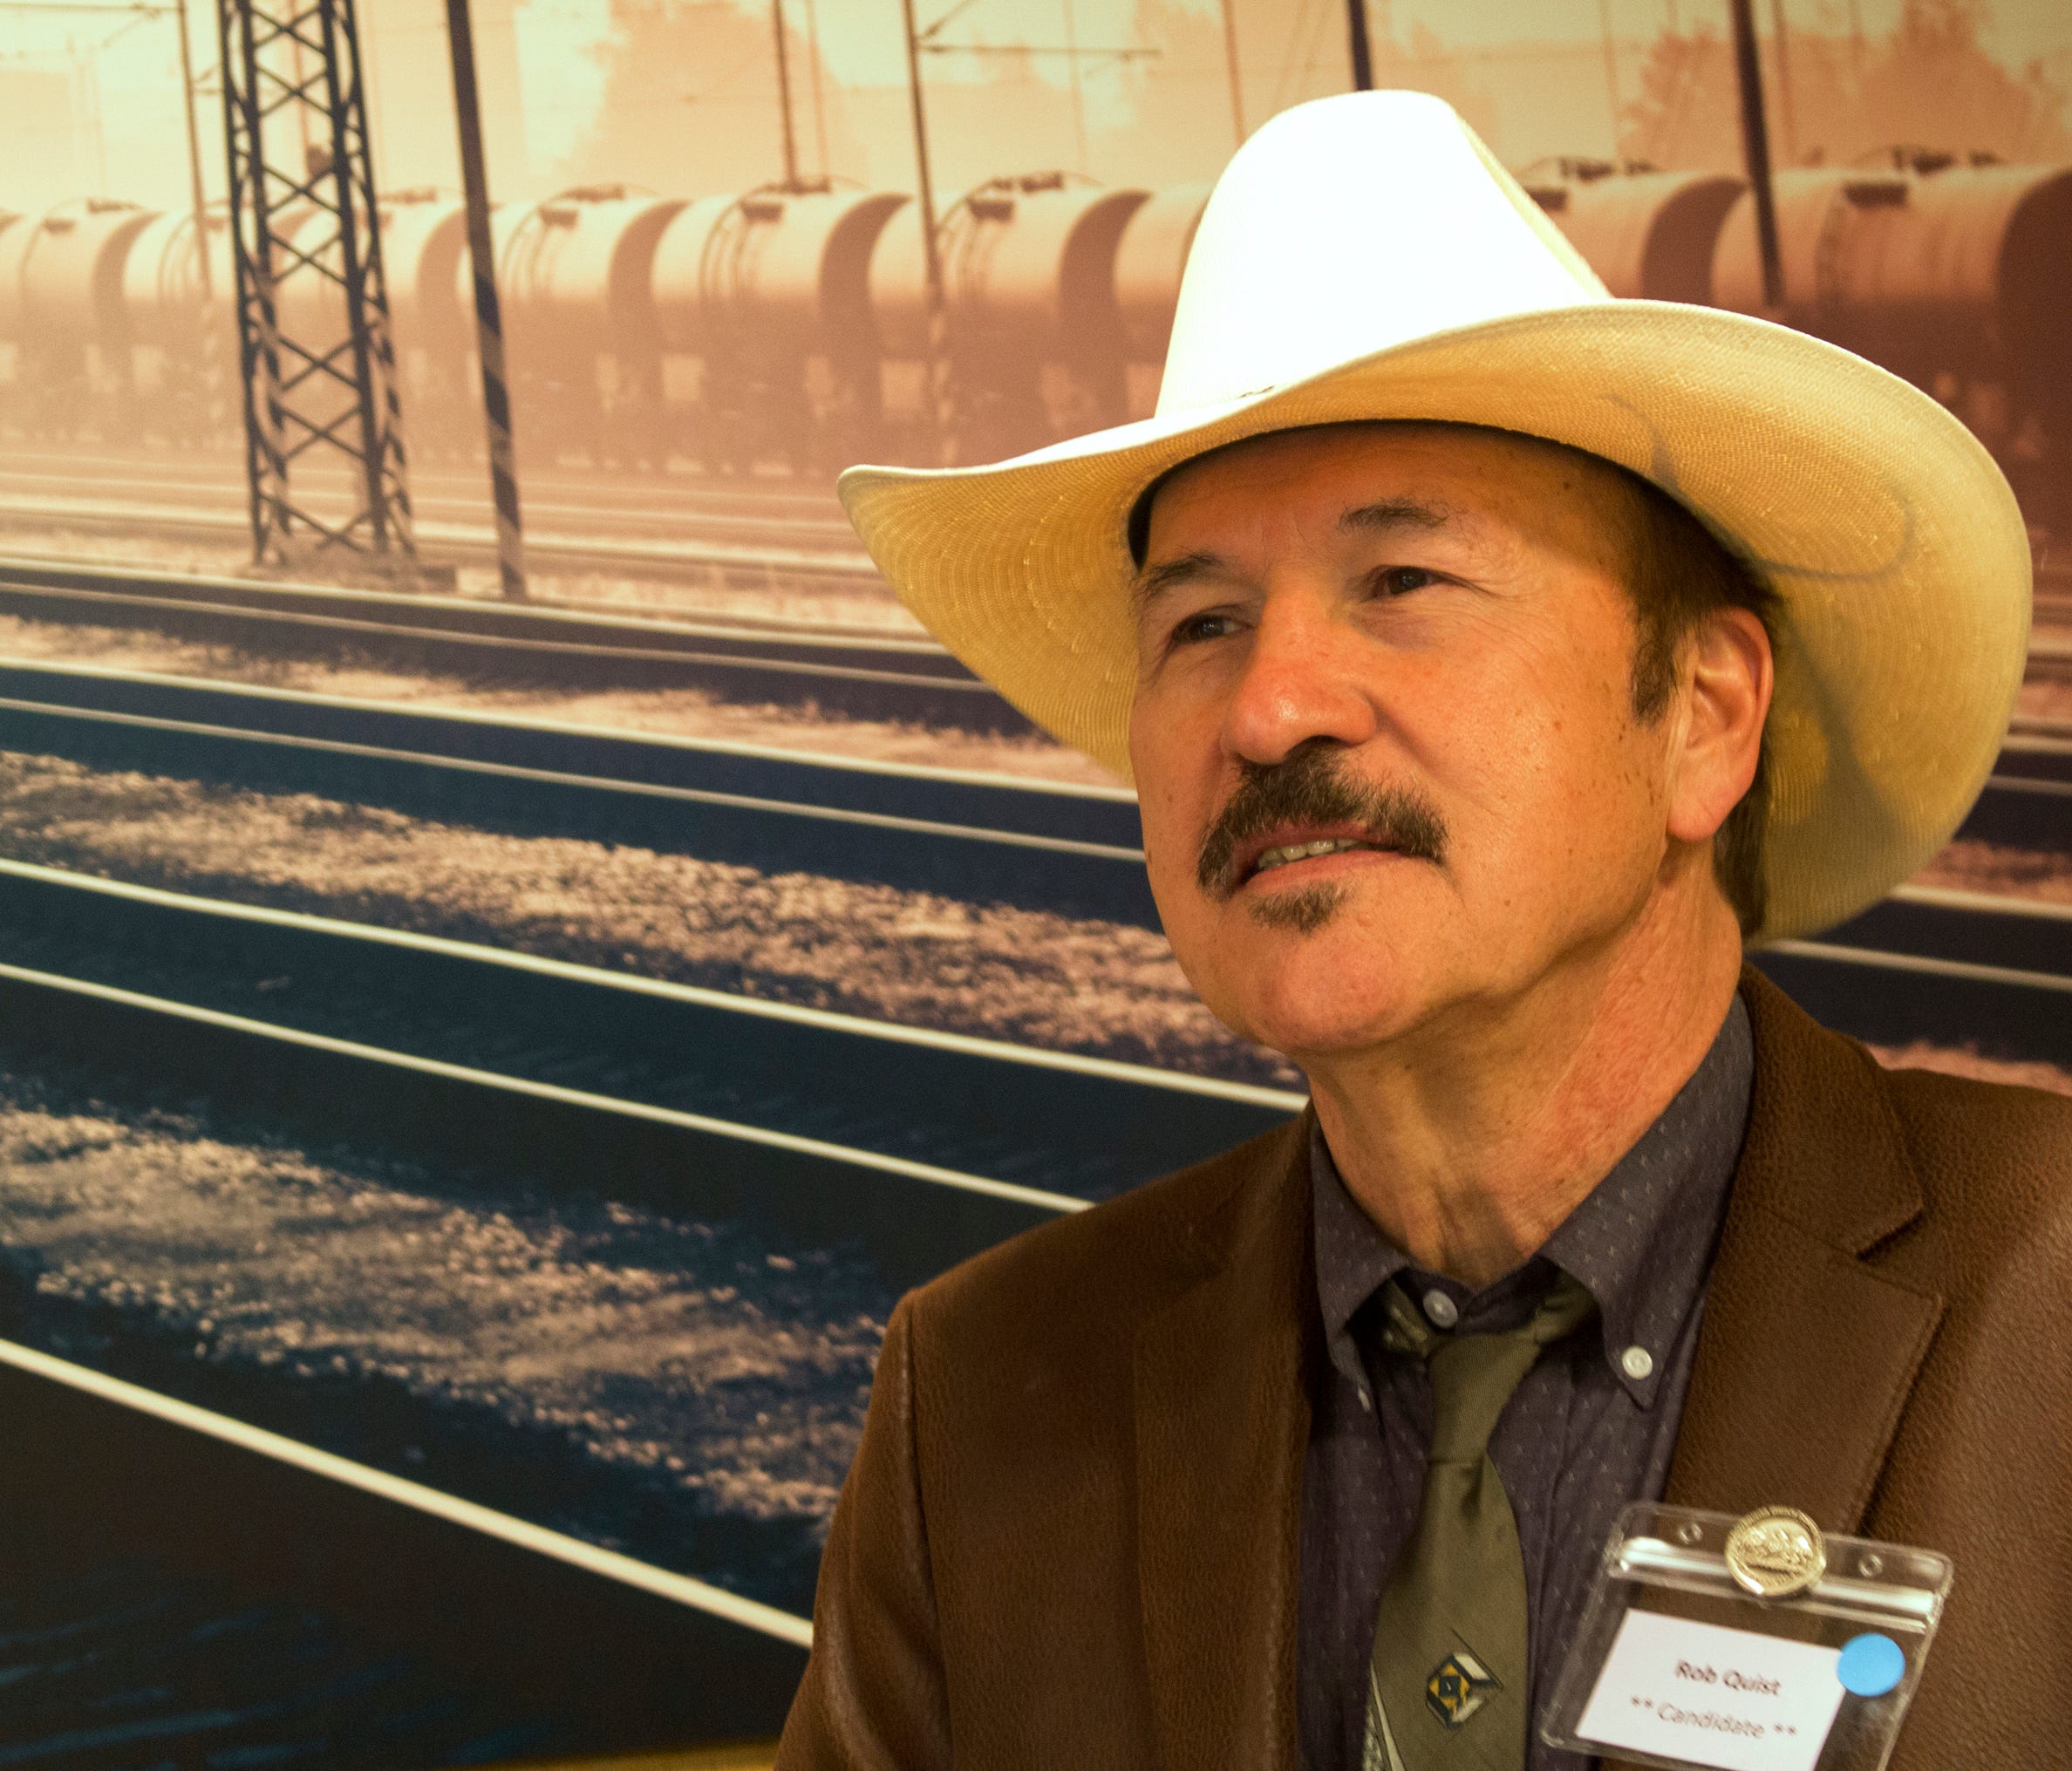 Democrat Rob Quist is running for an open House seat in Montana.